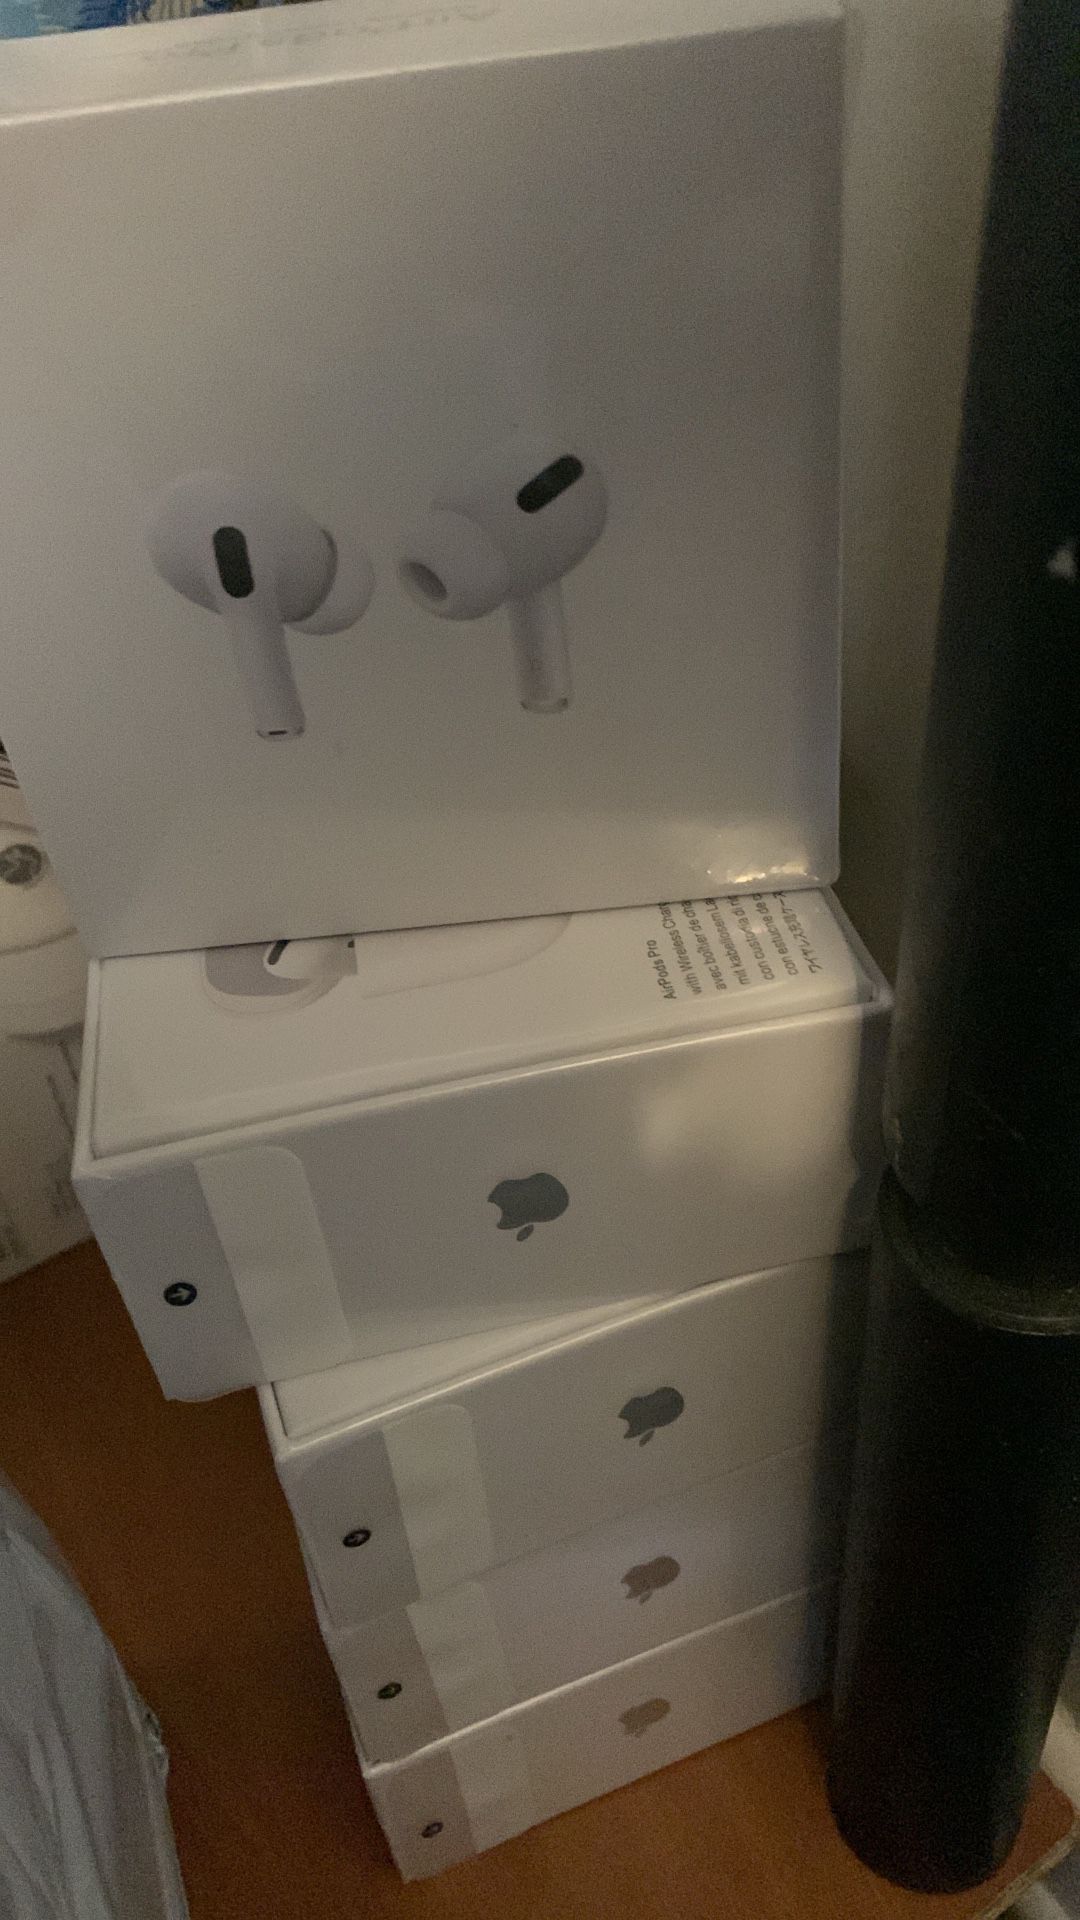 Apple AirPods Pro’s 2 